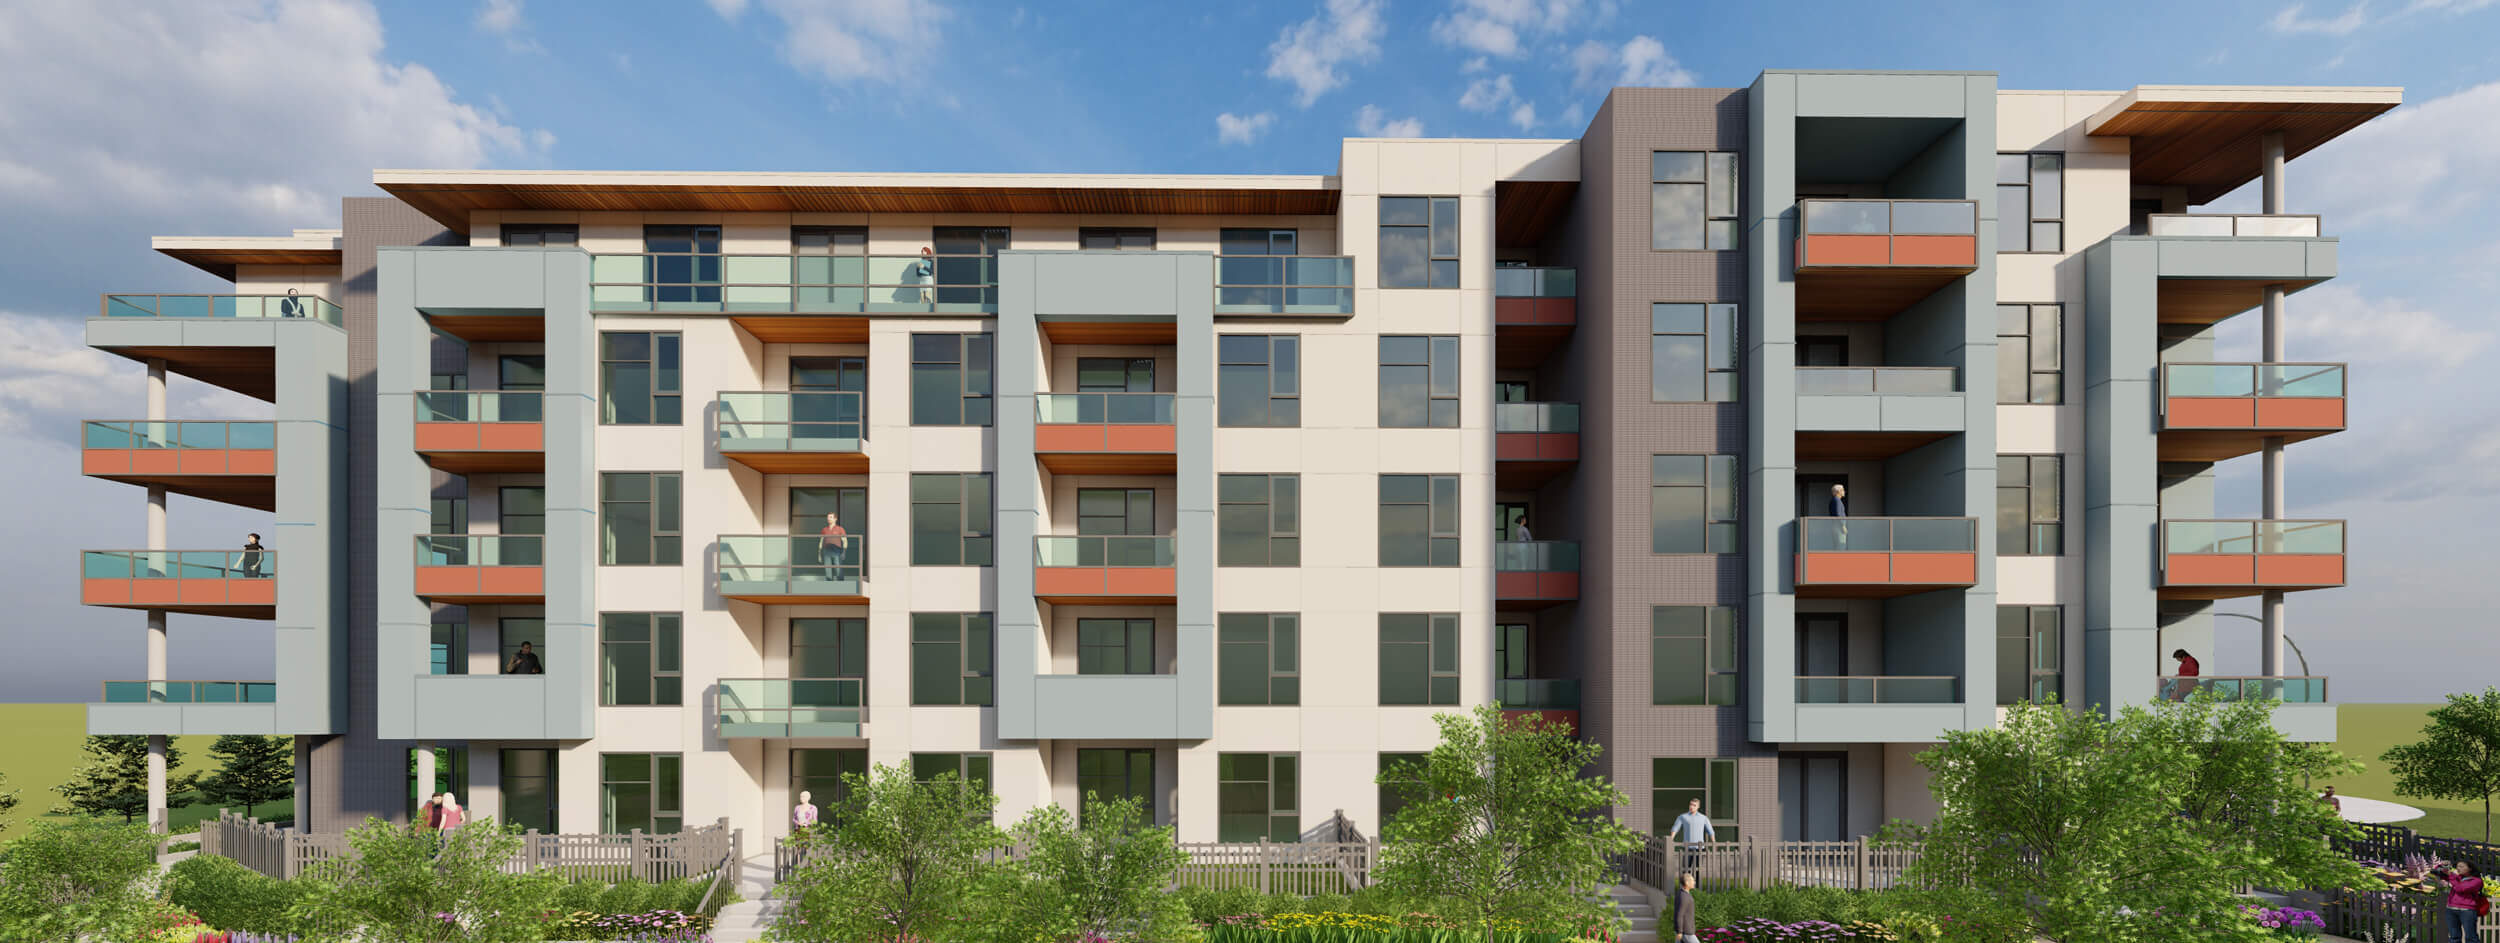 The “Fraser Hwy” development is a 4-storey residential condo project in Surrey. Design by Group 161 | DF Architecture.